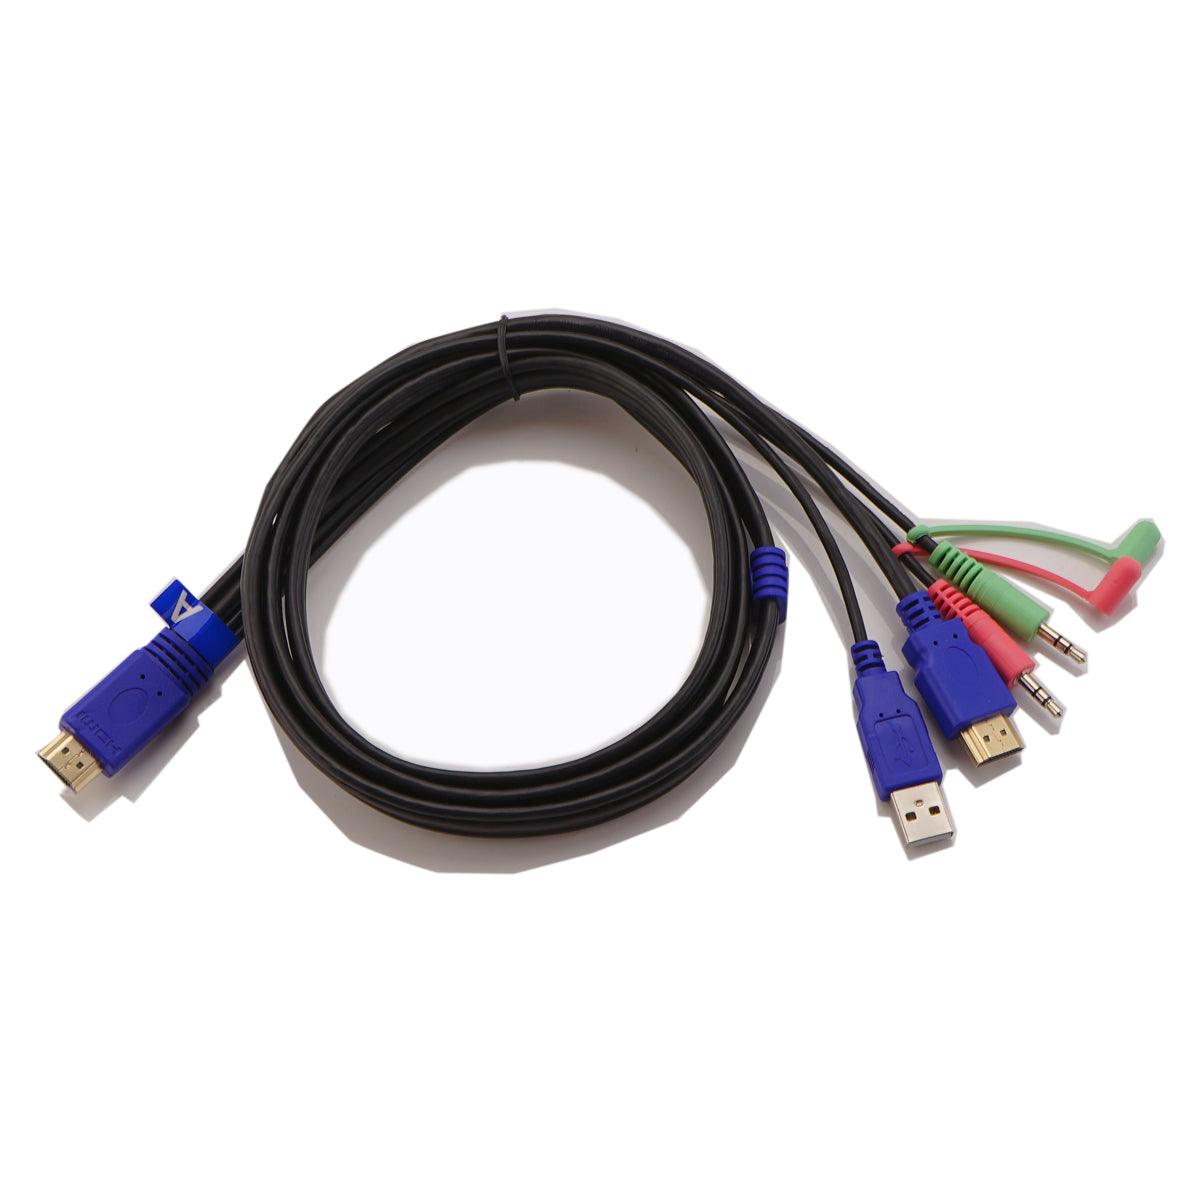 HDMI KVM Cable A 5 Feet (1.5 Meters) Dedicated for CKL HDMI Dual Monitor KVM Switches for Customer Who Needs Cable - CKL KVM Switches